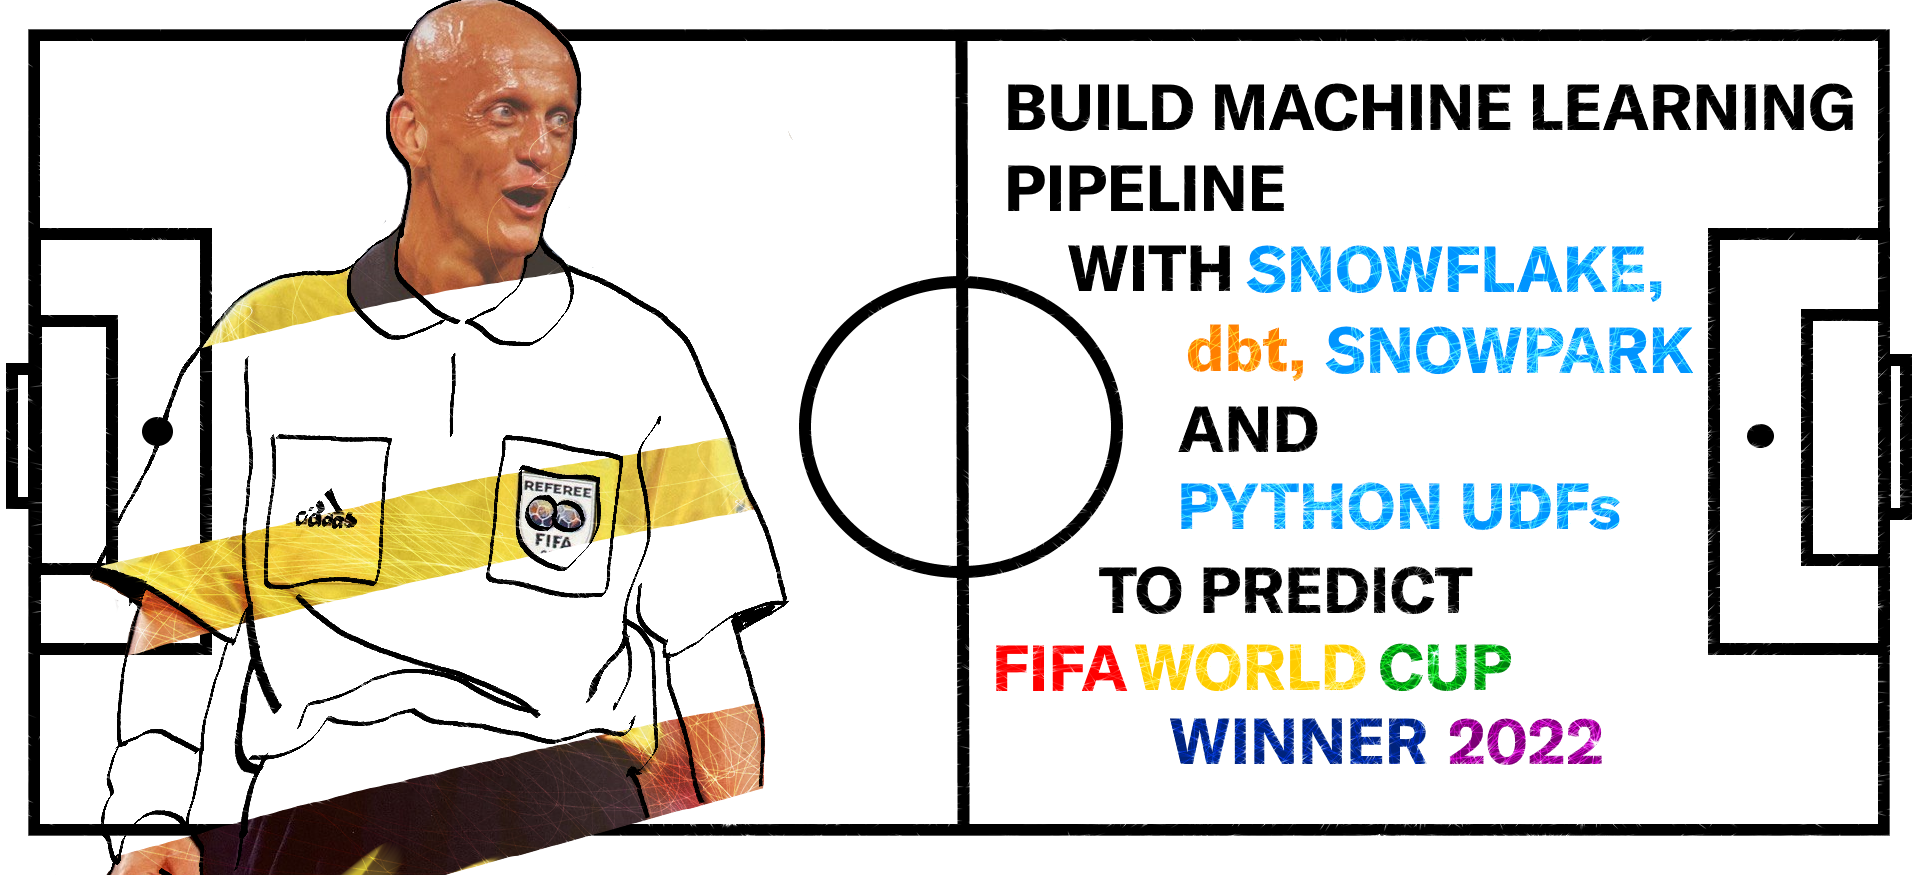 Builld Machine Learning Pipeline with Snowflake, dbt, Snowpark and Python UDFs to predict FIFA World Cup Winner 2022